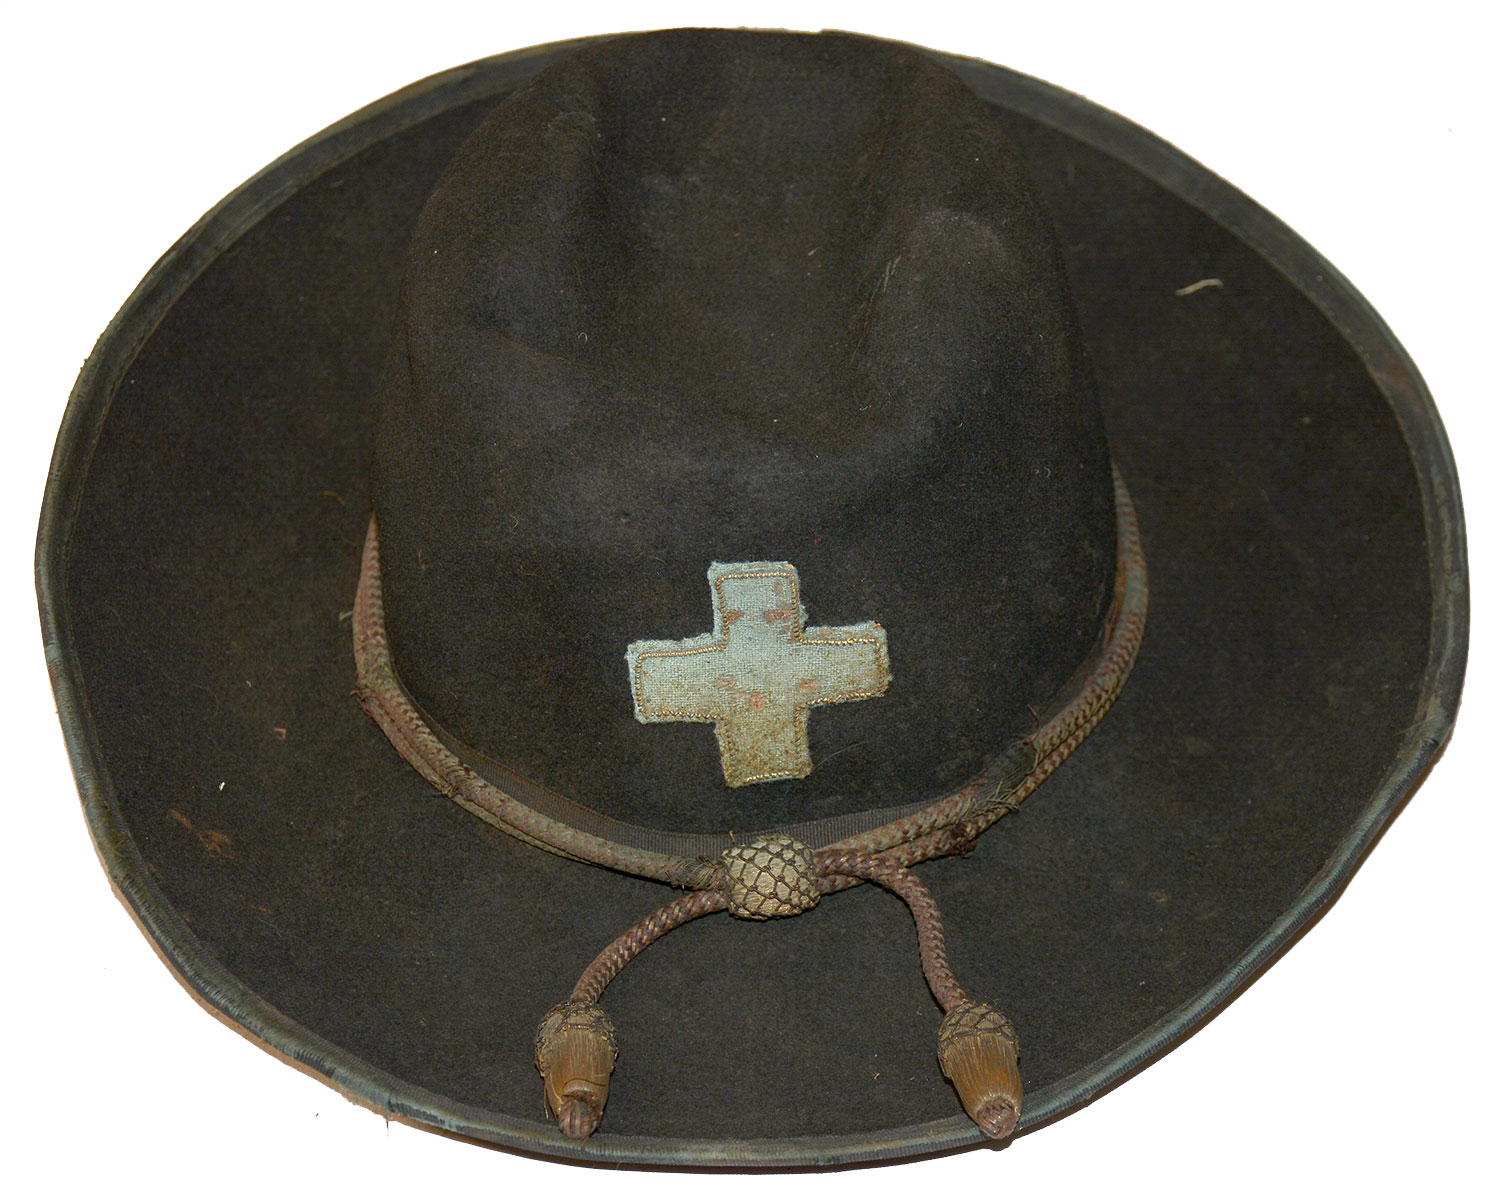 SLOUCH HAT WITH CORPS BADGE OF CAPT. J.G. PARR 139 PA, WIA COLD HARBOR & PETERSBURG, CITED FOR PERSONAL GALLANTRY, PROMOTED LT. COLONEL BREVETED COLONEL 